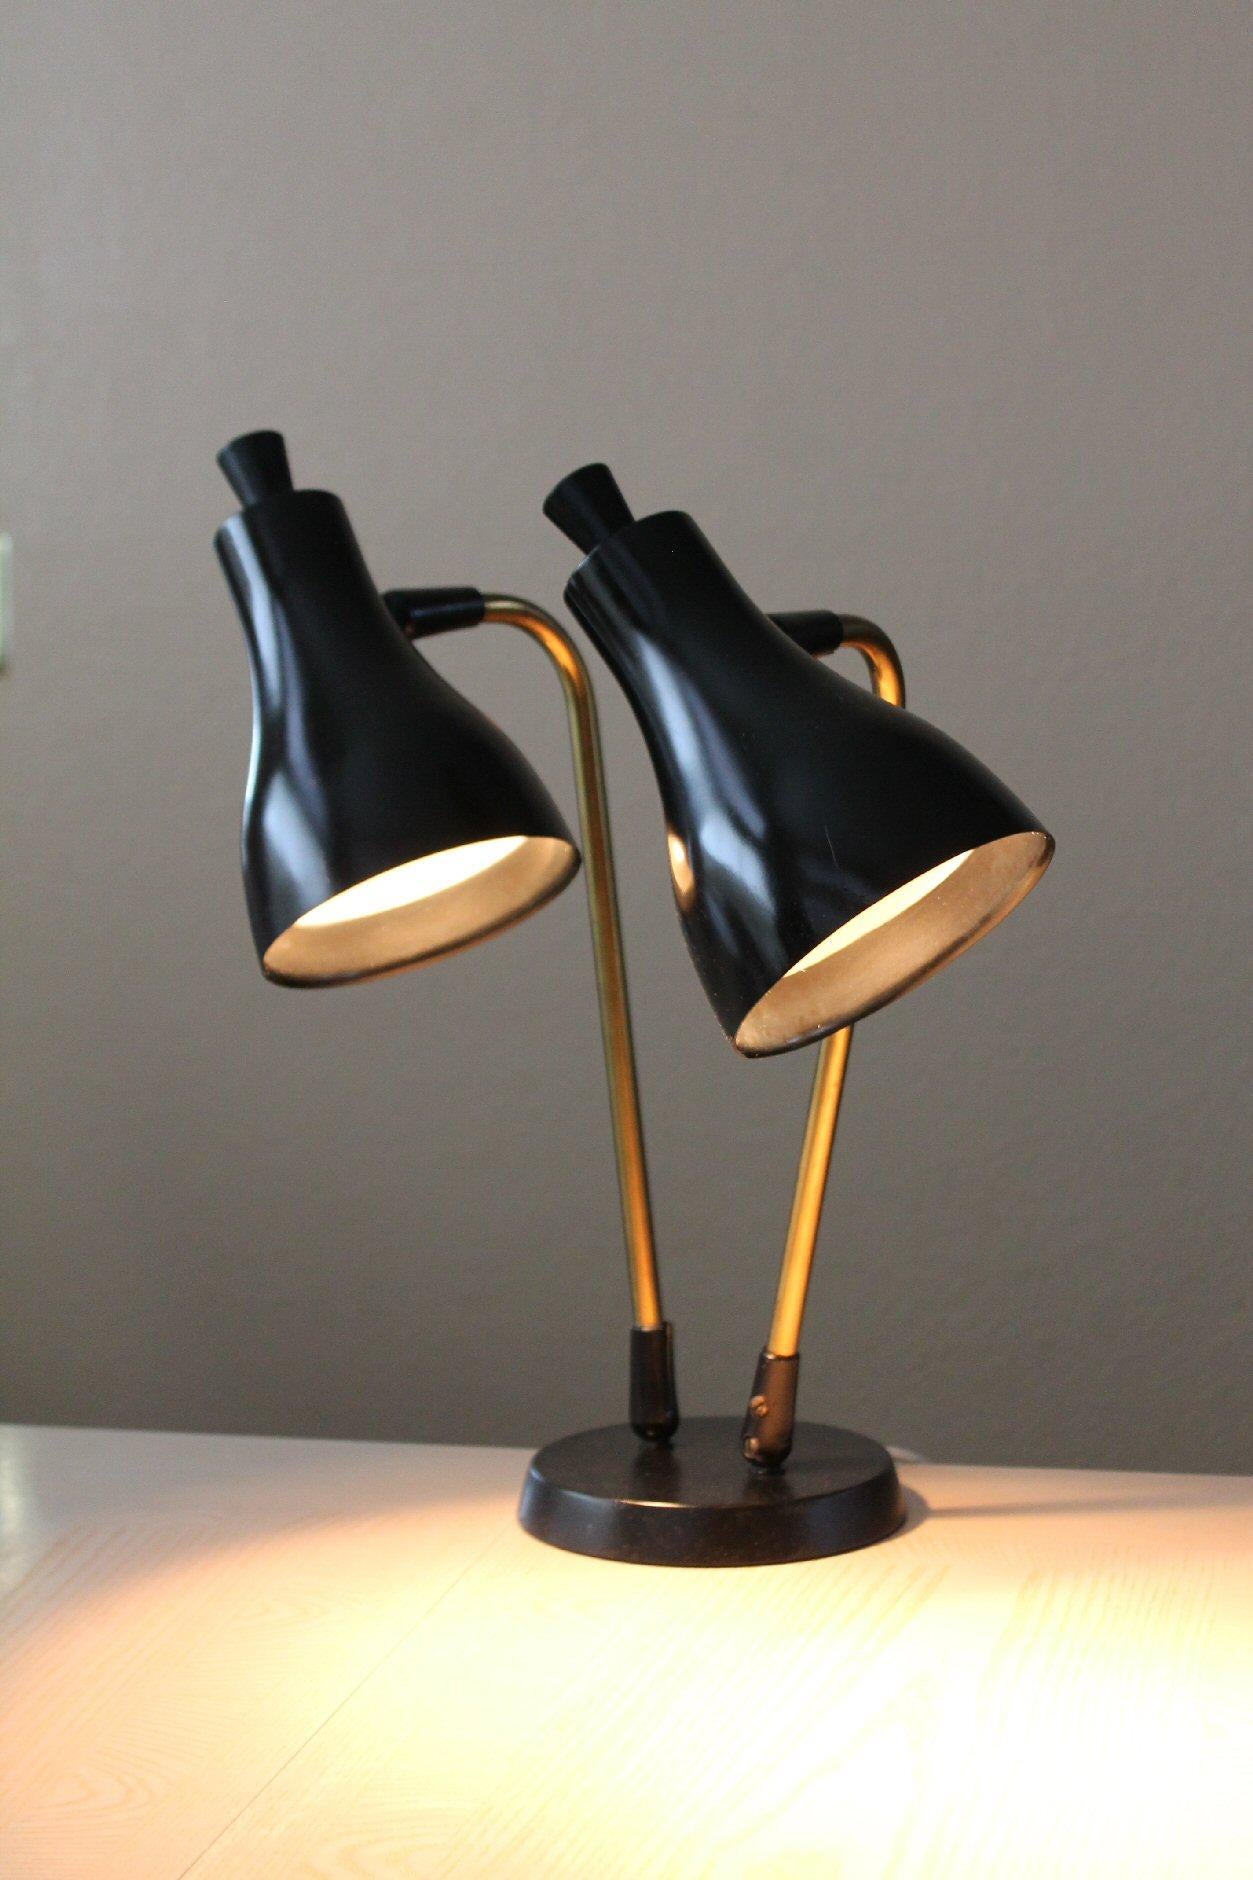 ICONIC!

Simply BEAUTIFUL Black
LIGHTOLIER DUAL SHADE DESK/TABLE LAMP
By GERALD THURSTON

Does your Case Study House need new lamps? This marvelous specimen is sure to be a welcome addition!

These lamps, penned by Gerald Thurston the in-house